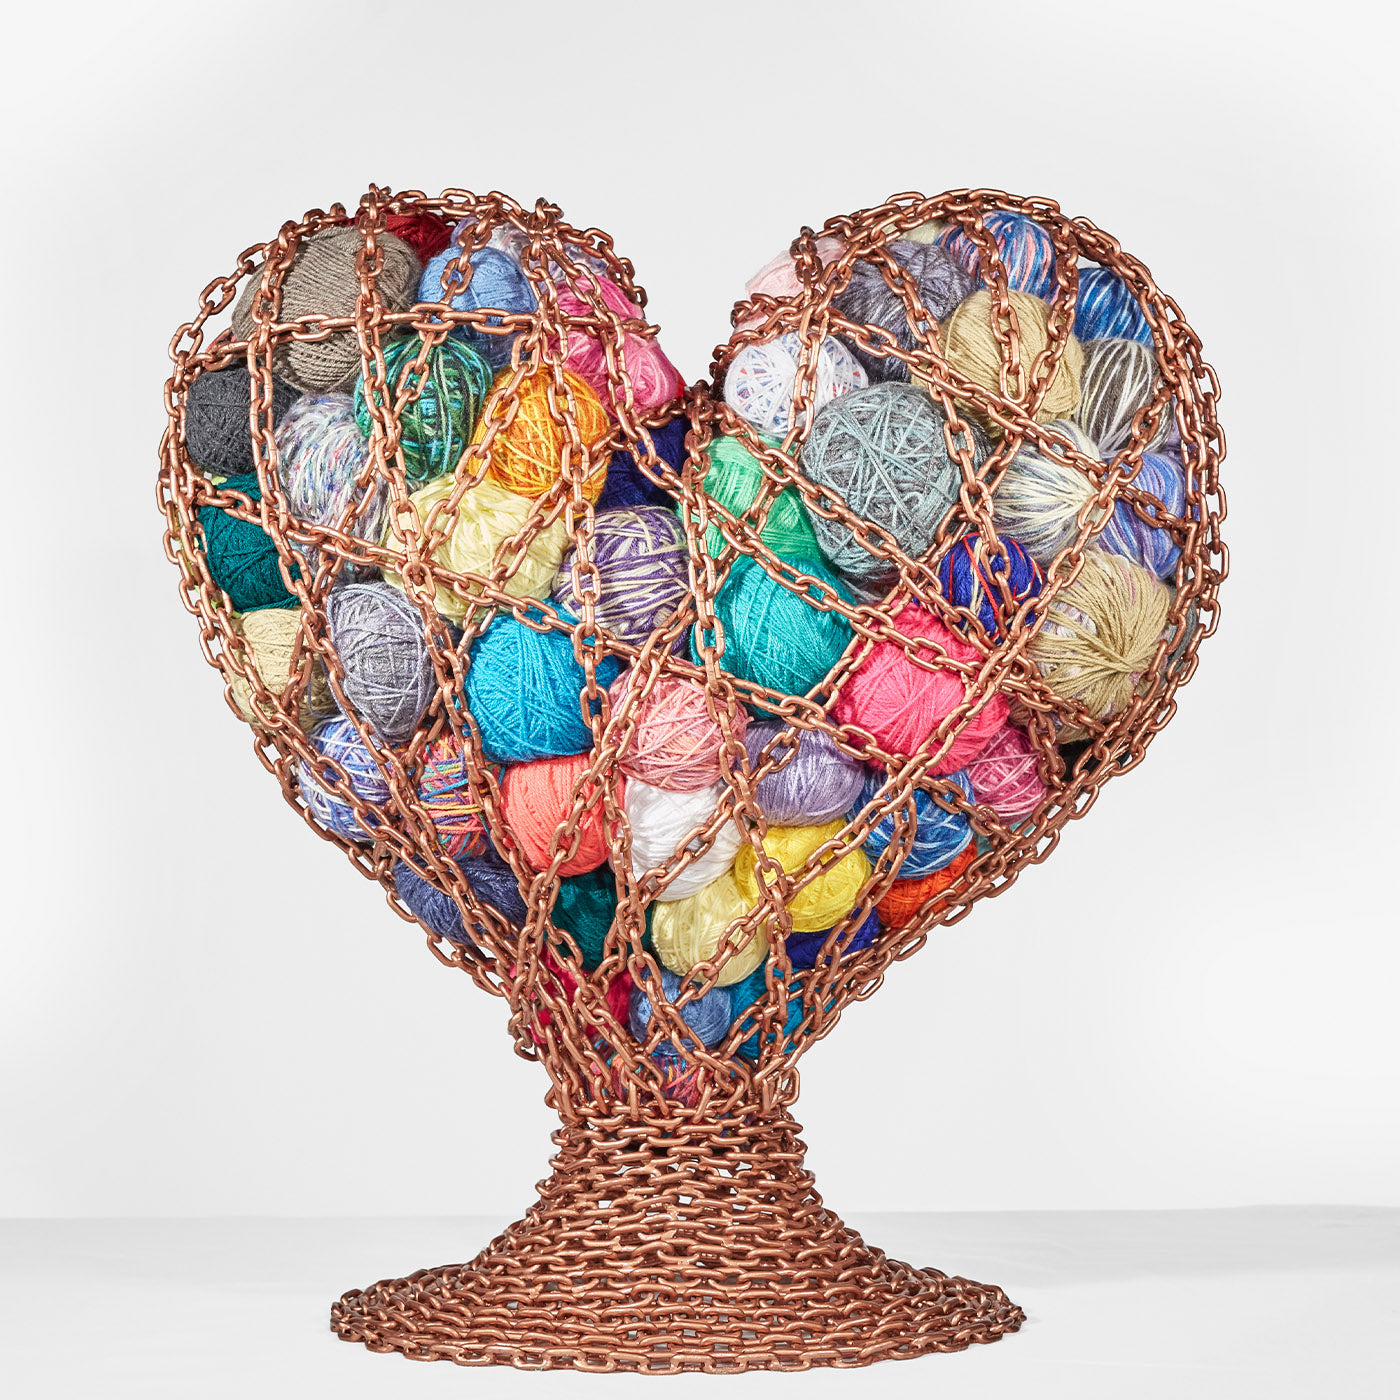 Chained Heart Sculpture - Alternative view 2